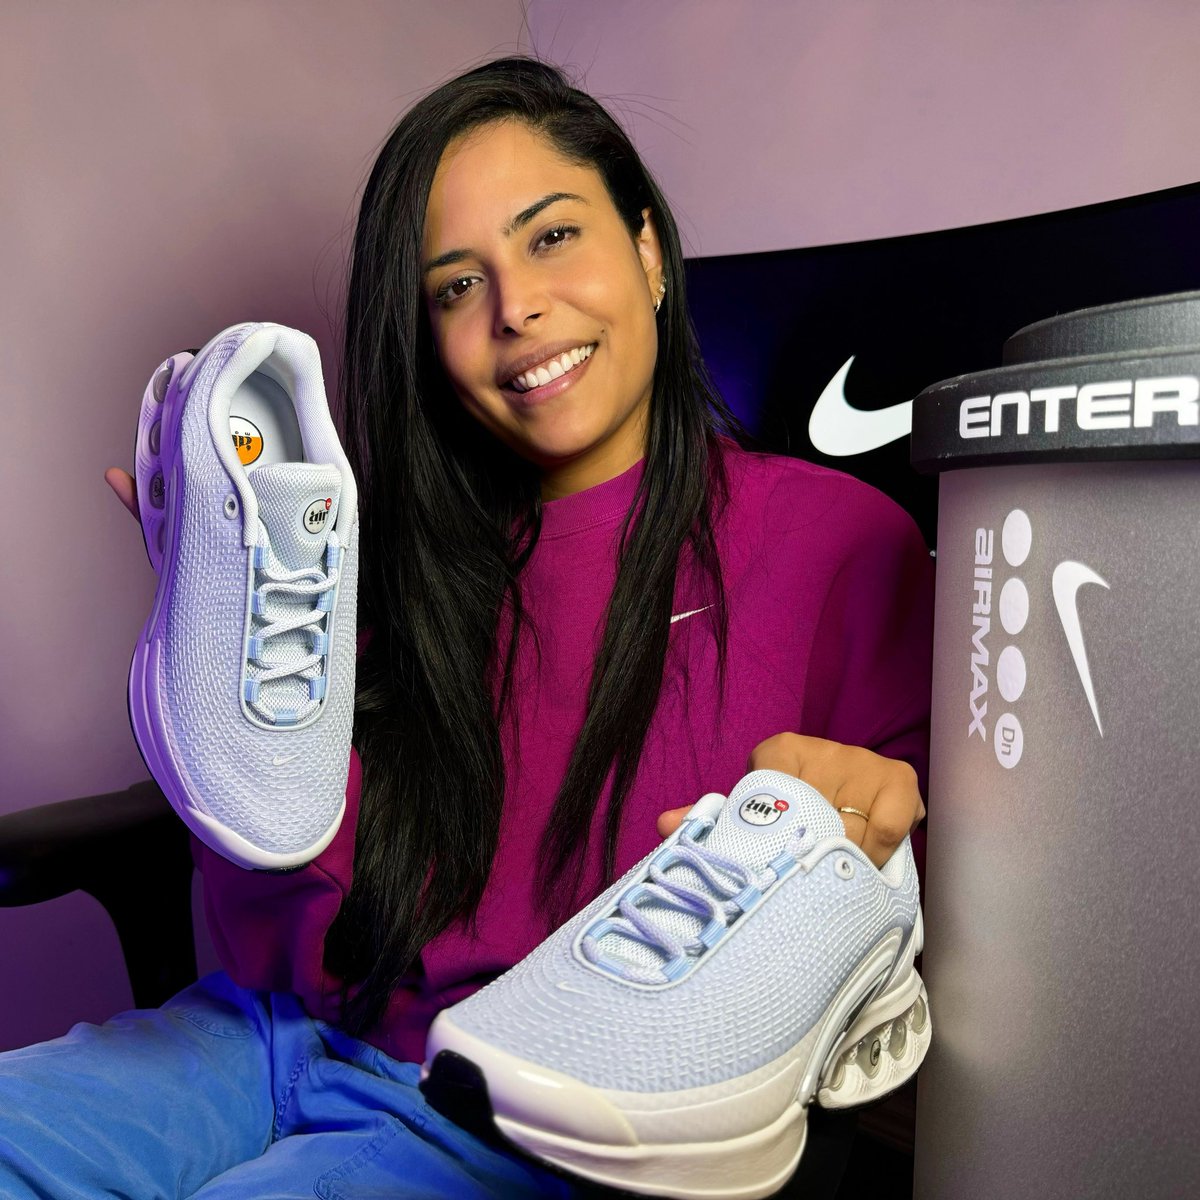 So excited to partner with @Nike and “Feel the Unreal” in the new Airphoria world #AirMaxDN #TeamNike